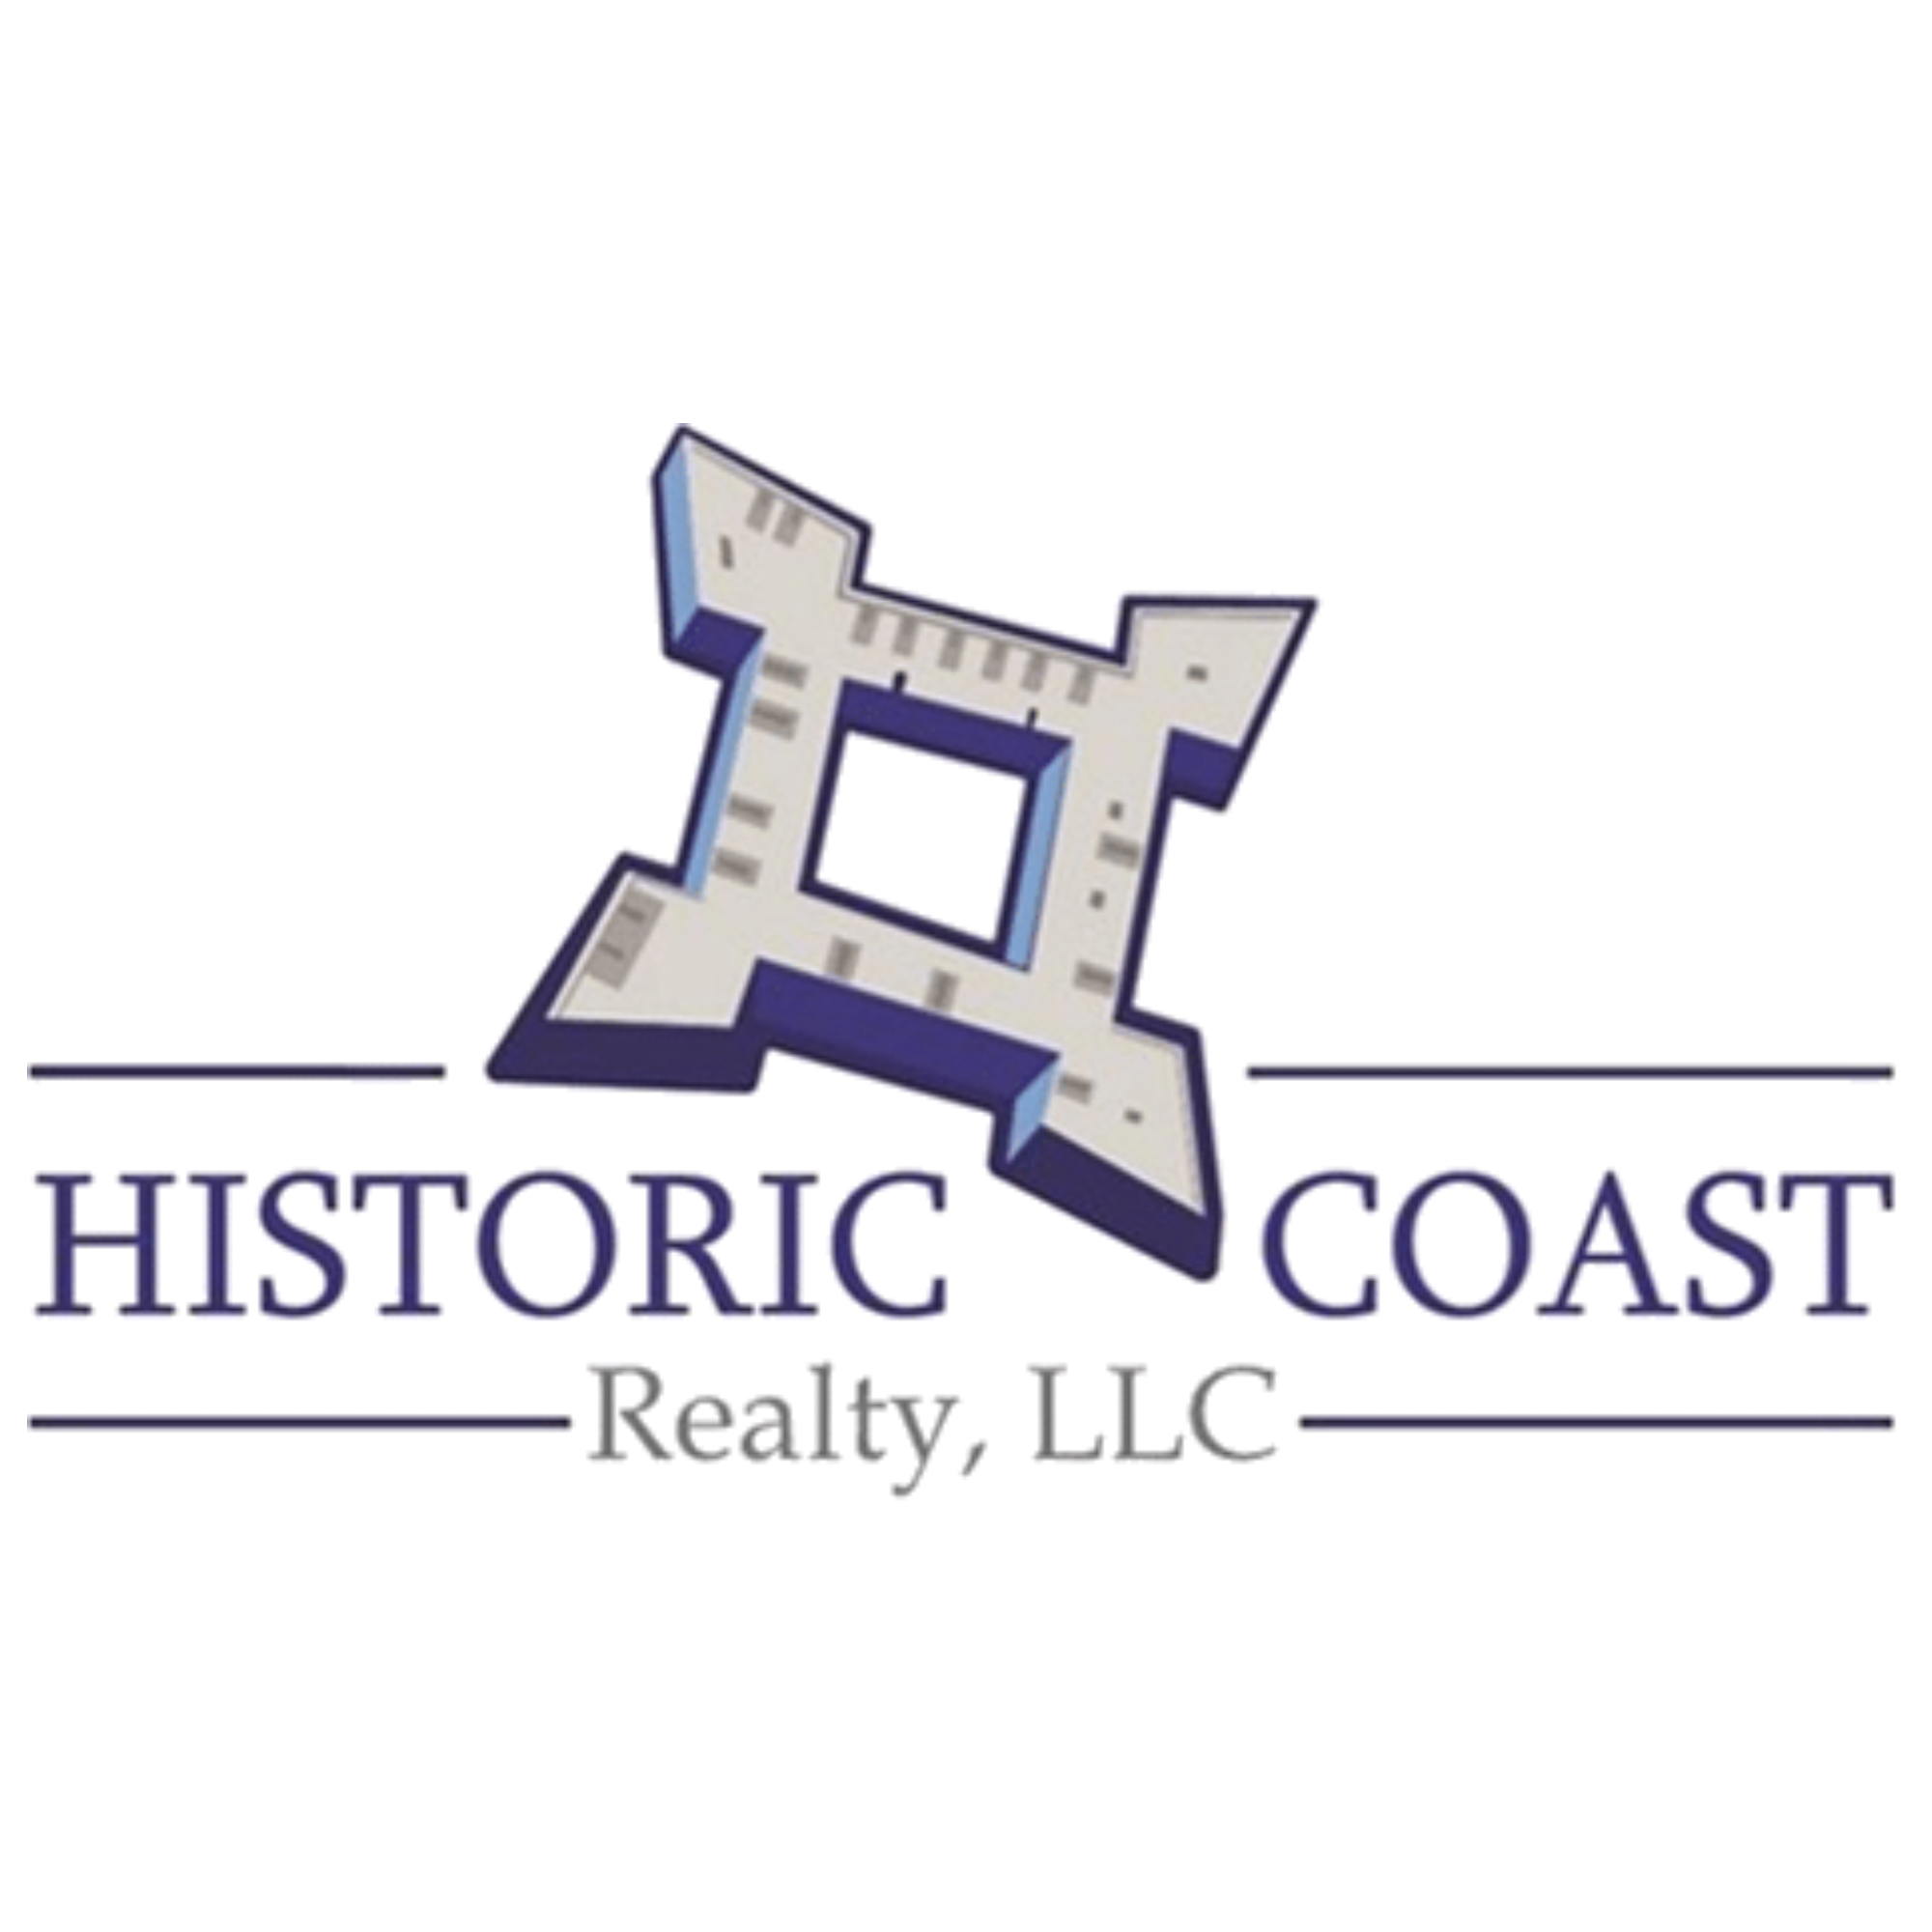 Historic Coast Realty serving St Augustine and surrounding communities